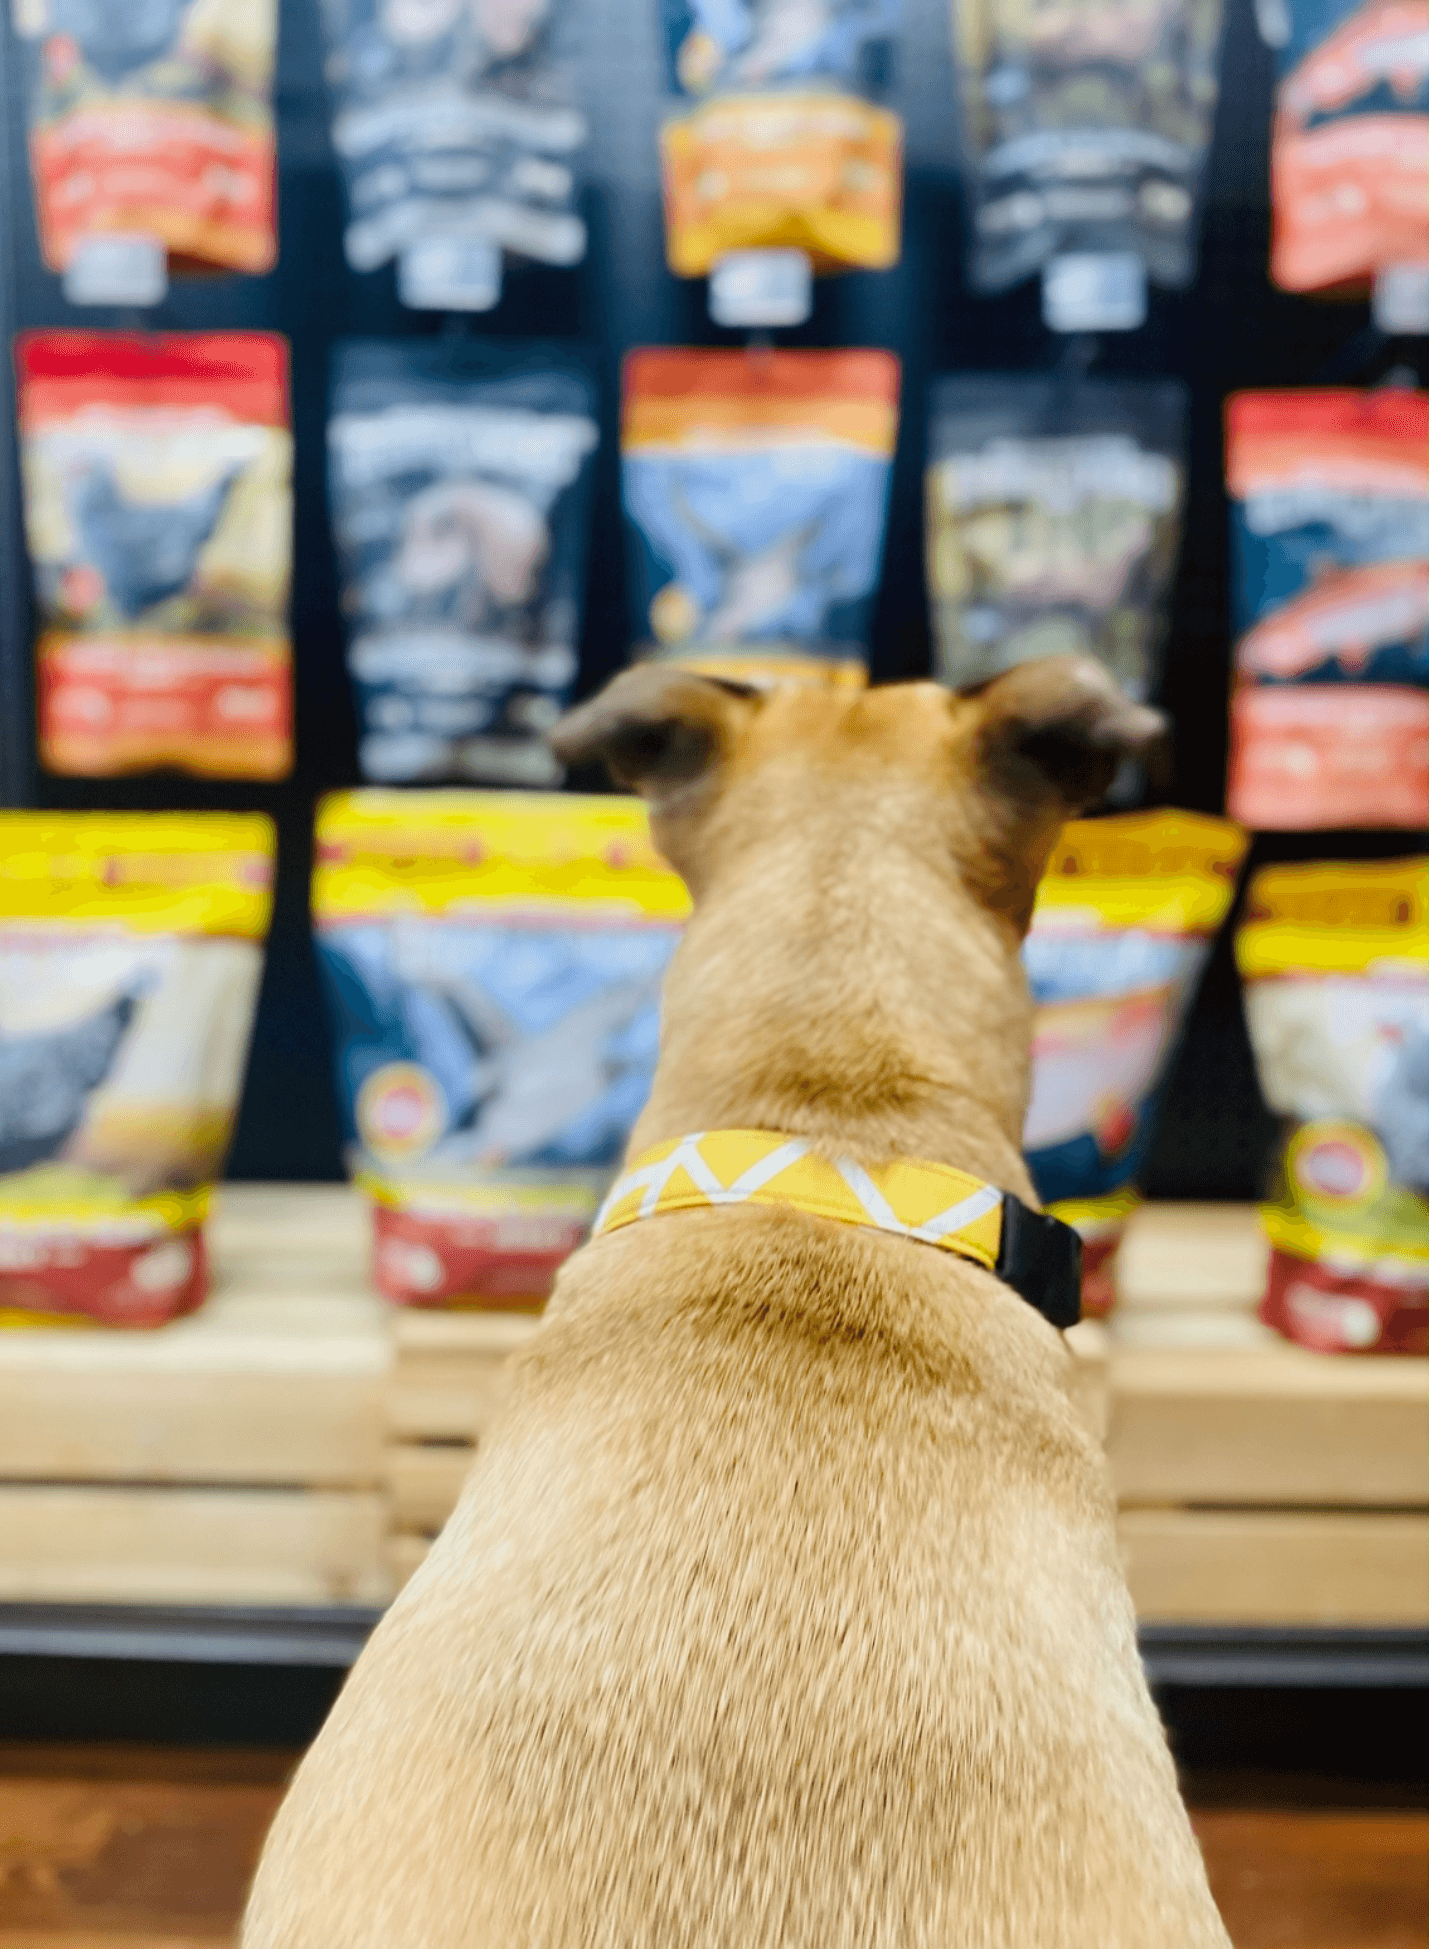 Dog watching all those snacks!